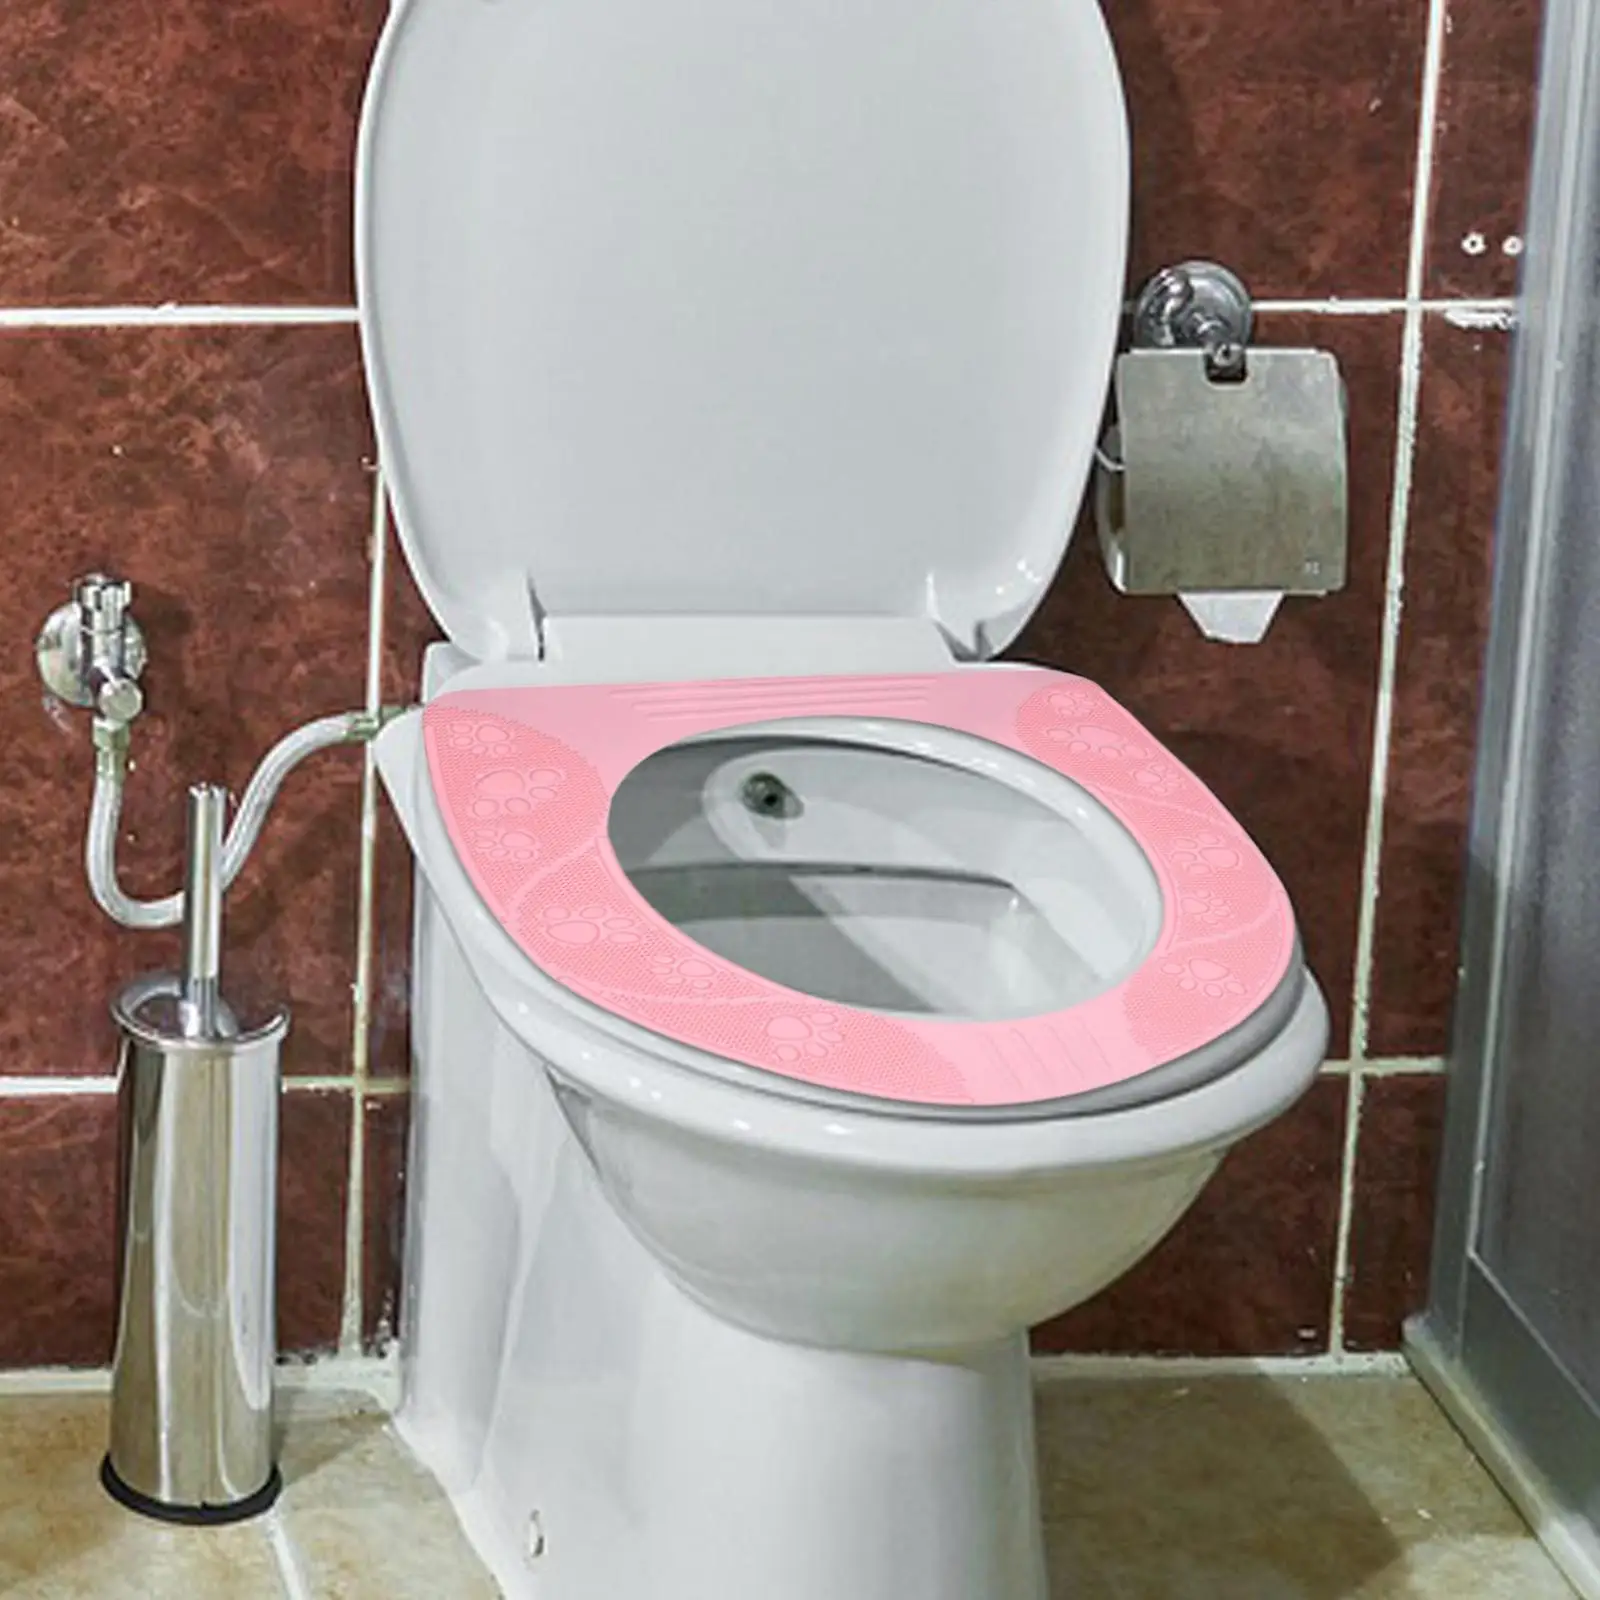 Toilet Seat Cover Comfortable Suction Waterproof Universal for Household